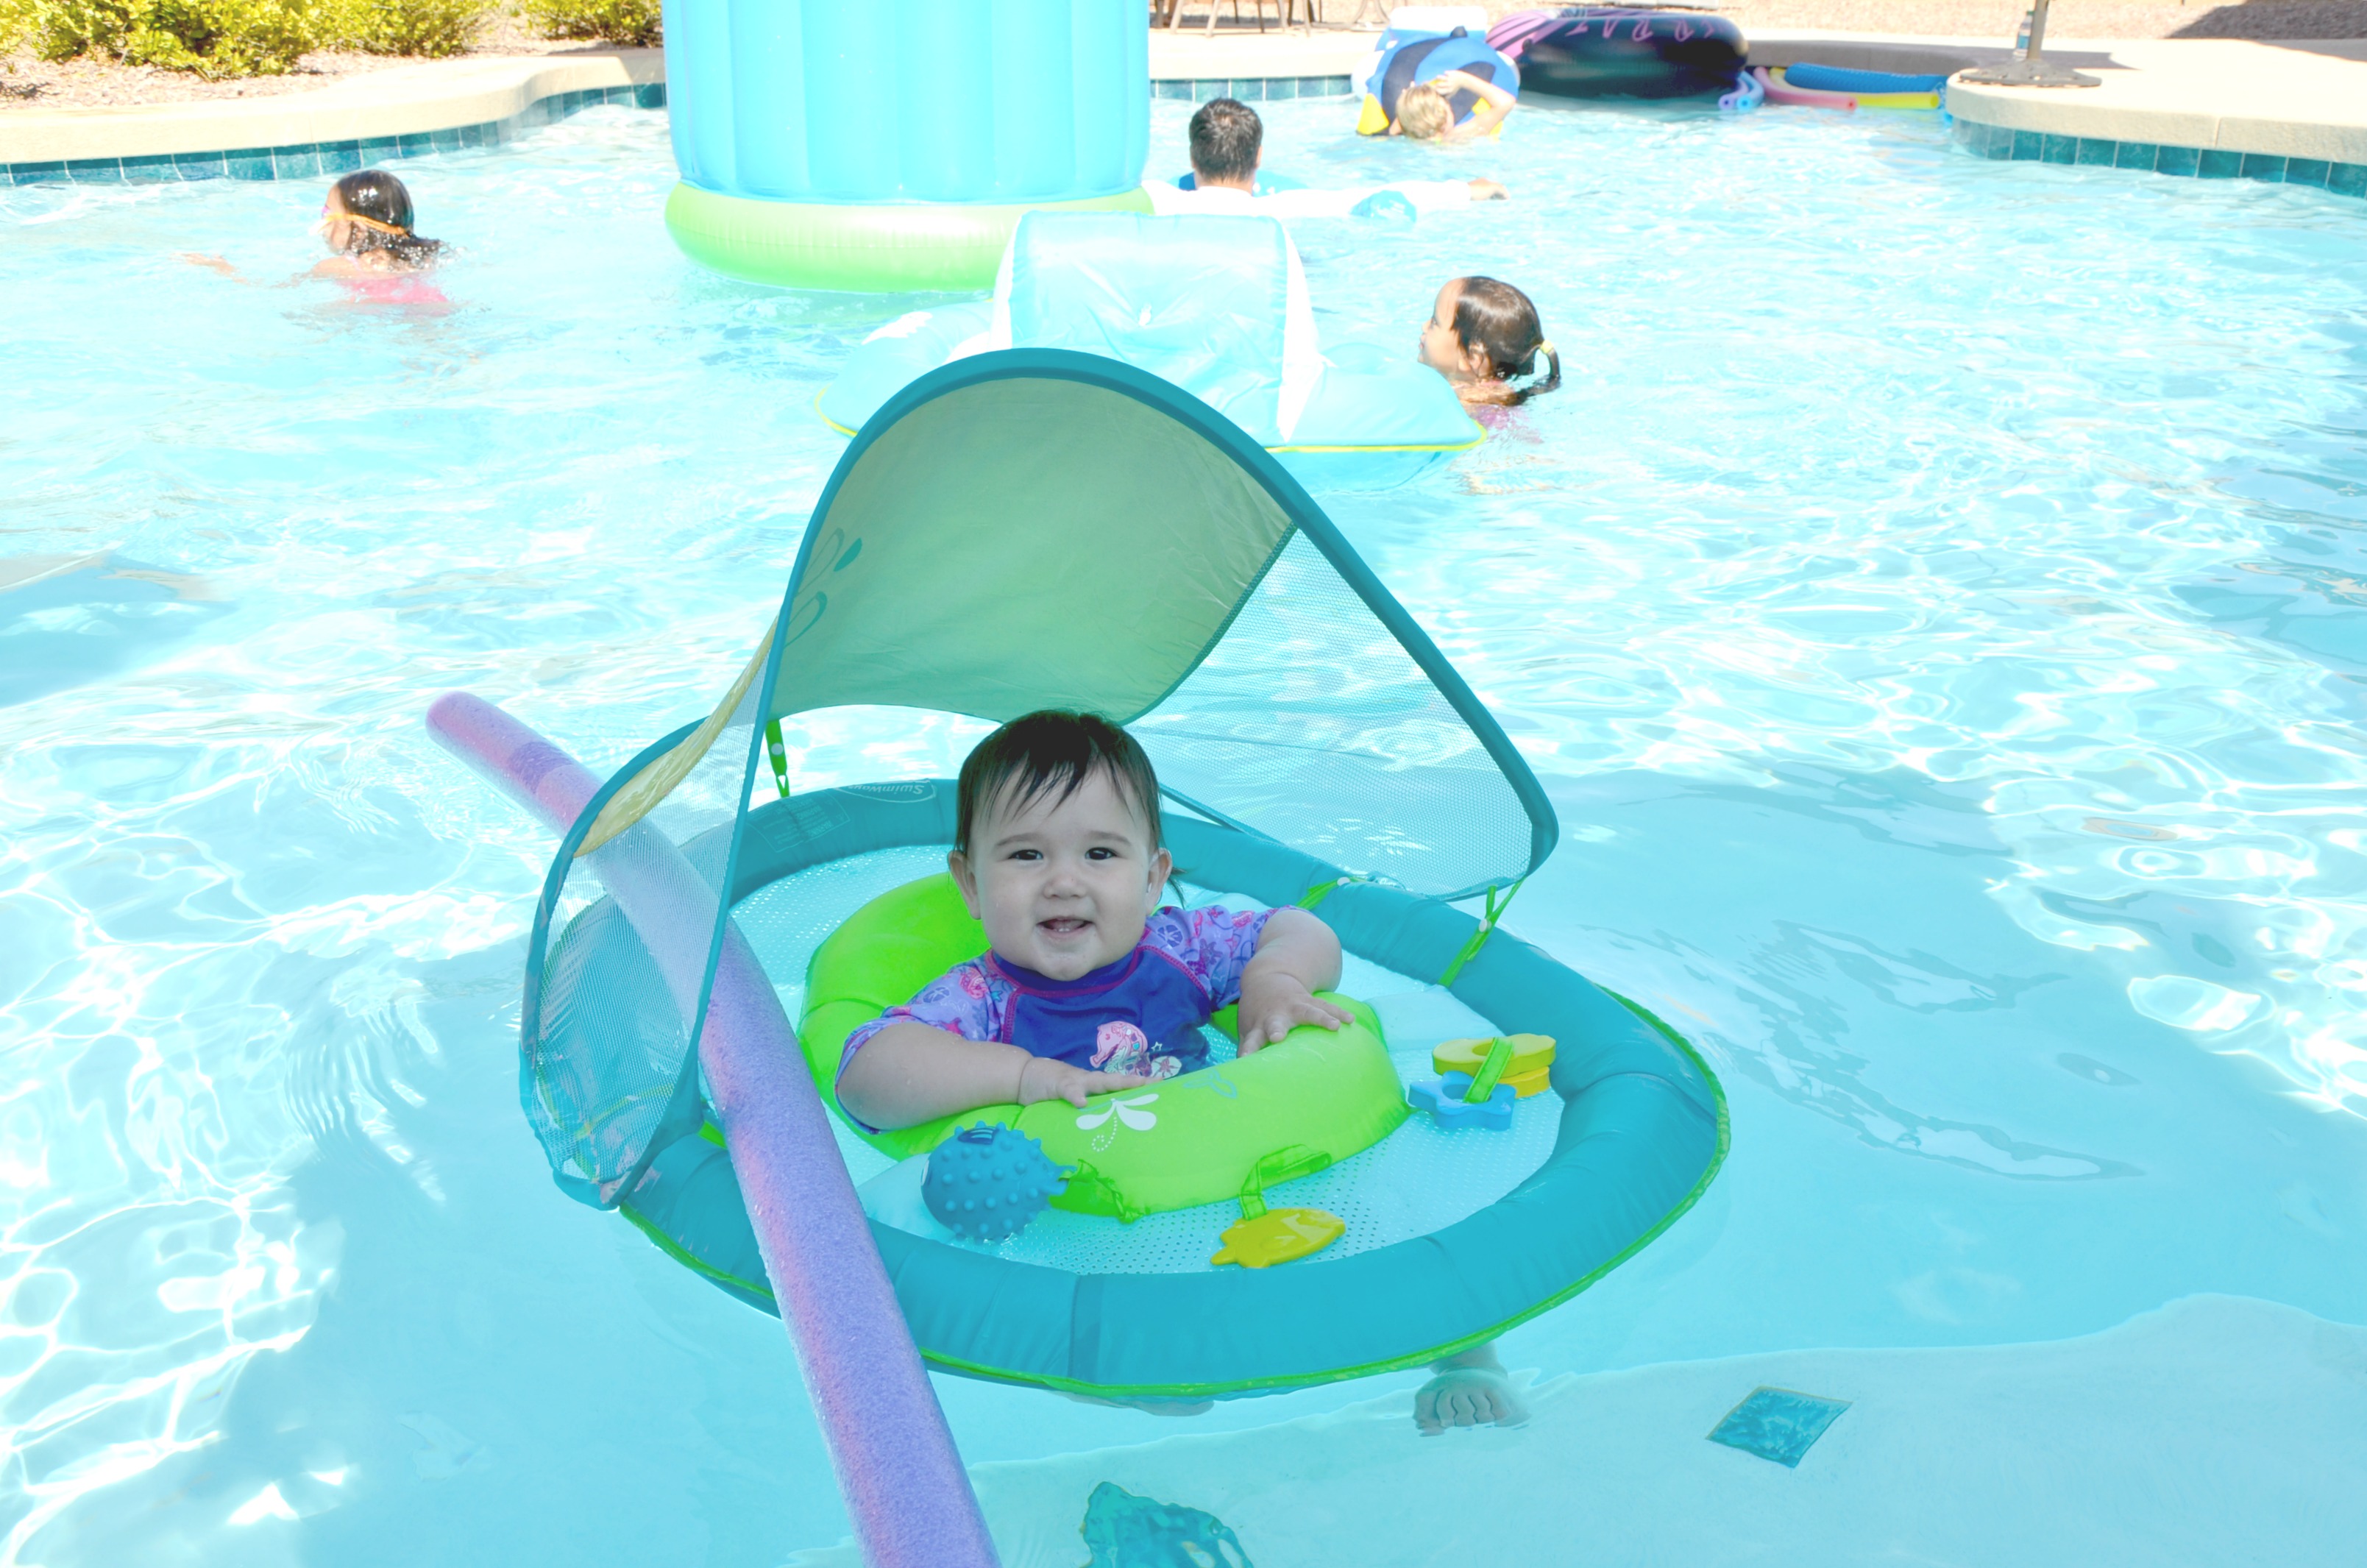 See how you can teach your child water safety with the best baby float for home pool safety. SwimWays Baby Spring Float Sun Canopy is safe and easy to use.